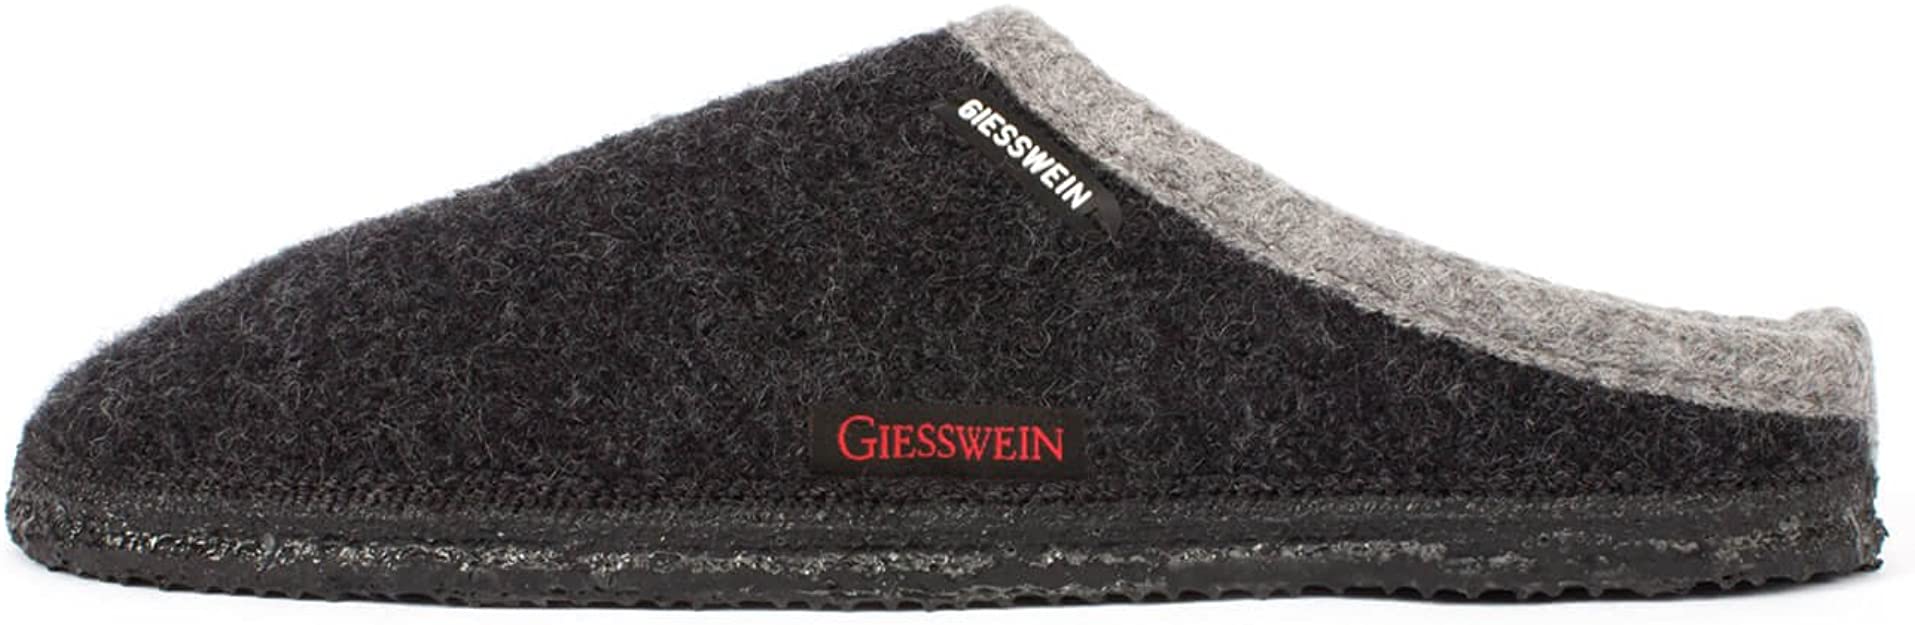 Giesswein Dannheim Slippers Men Anthracite - 7 - Slippers Shoes